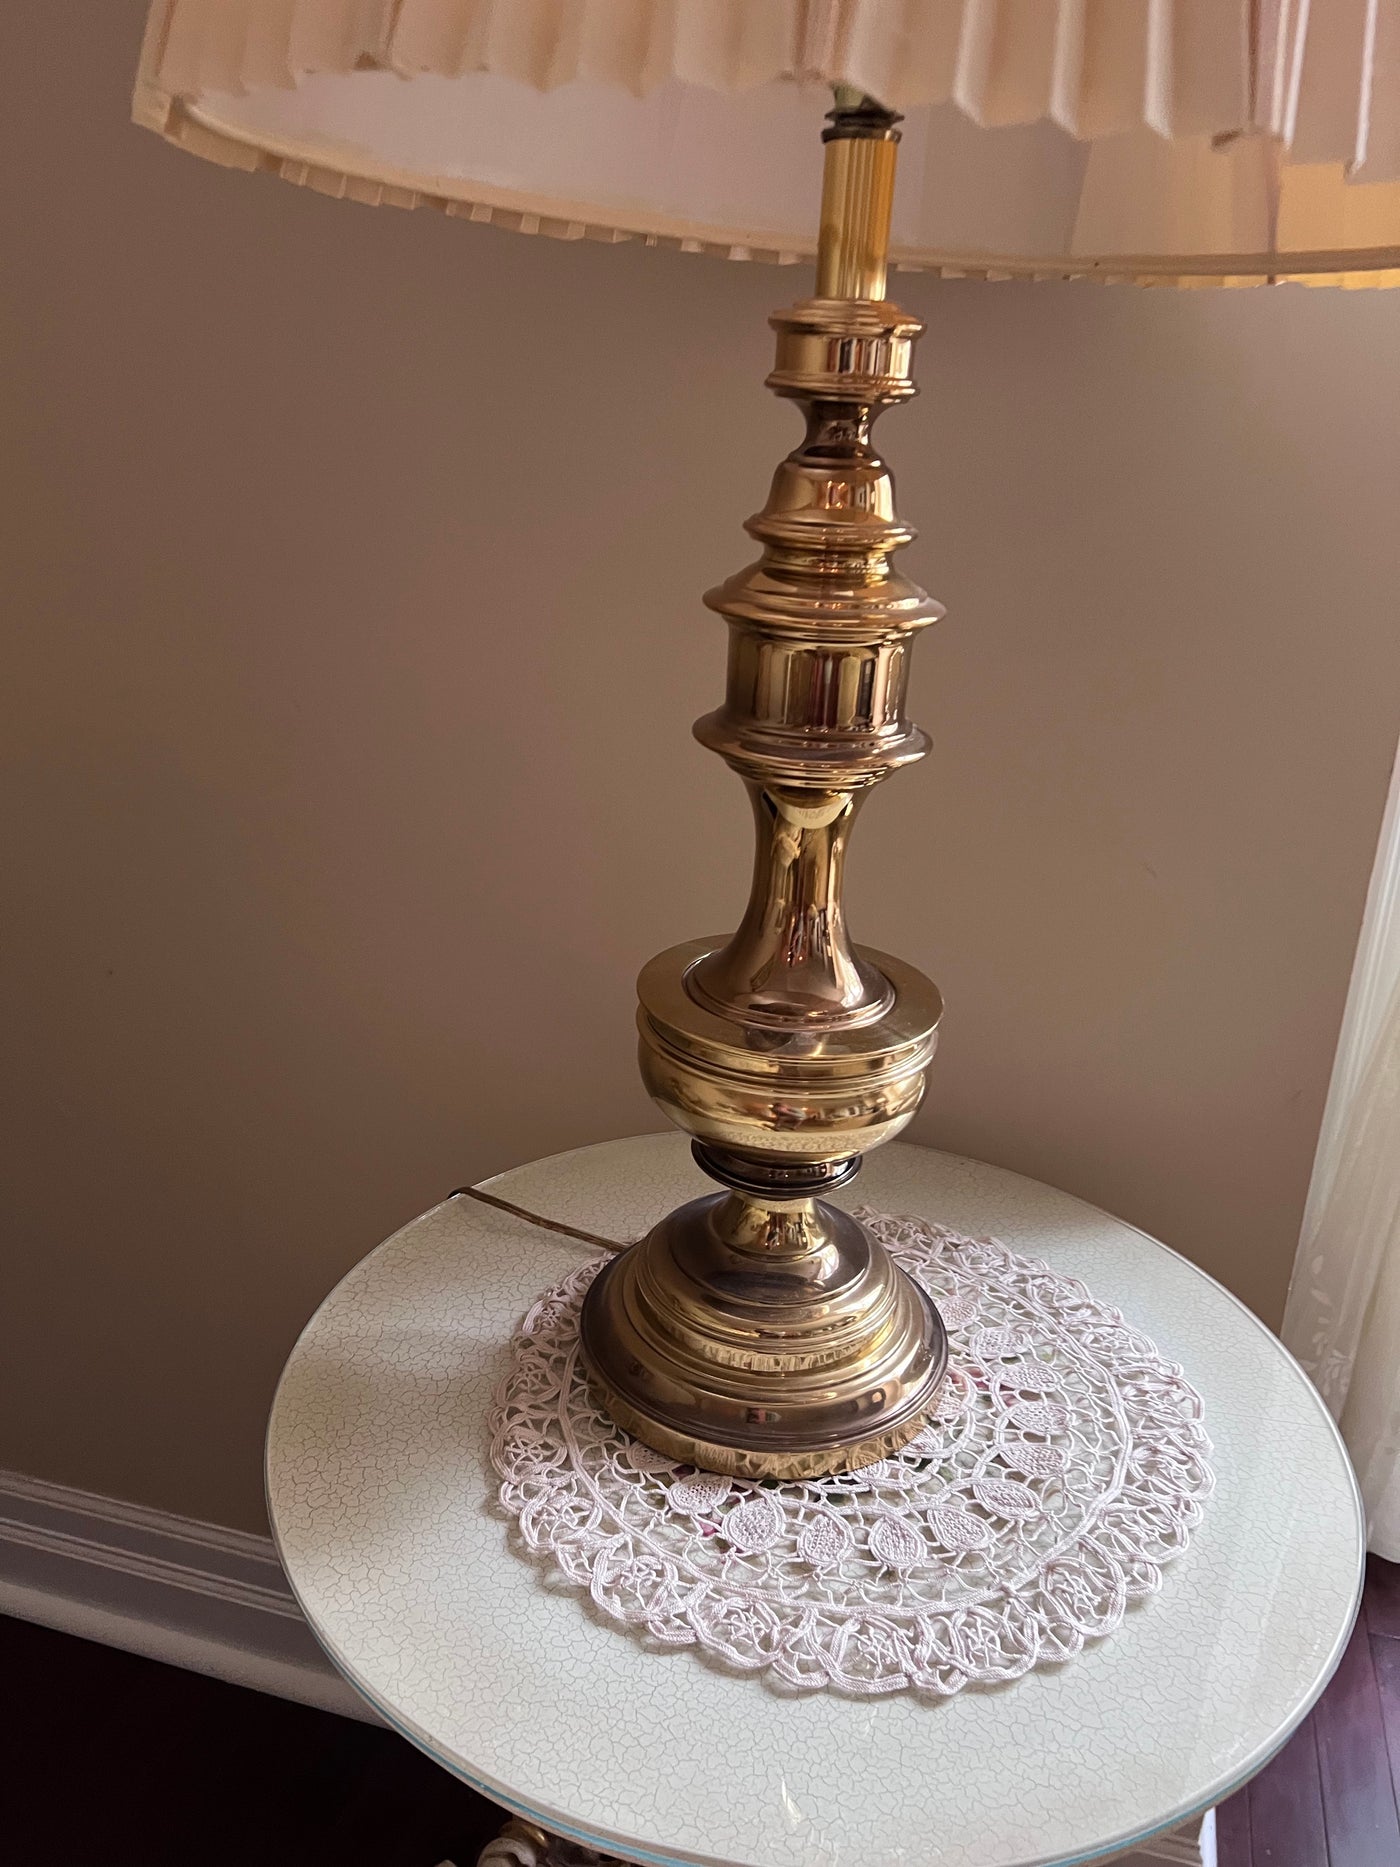 Pair of Brass Table Lamps, Made in Mexico – Sell My Stuff Canada